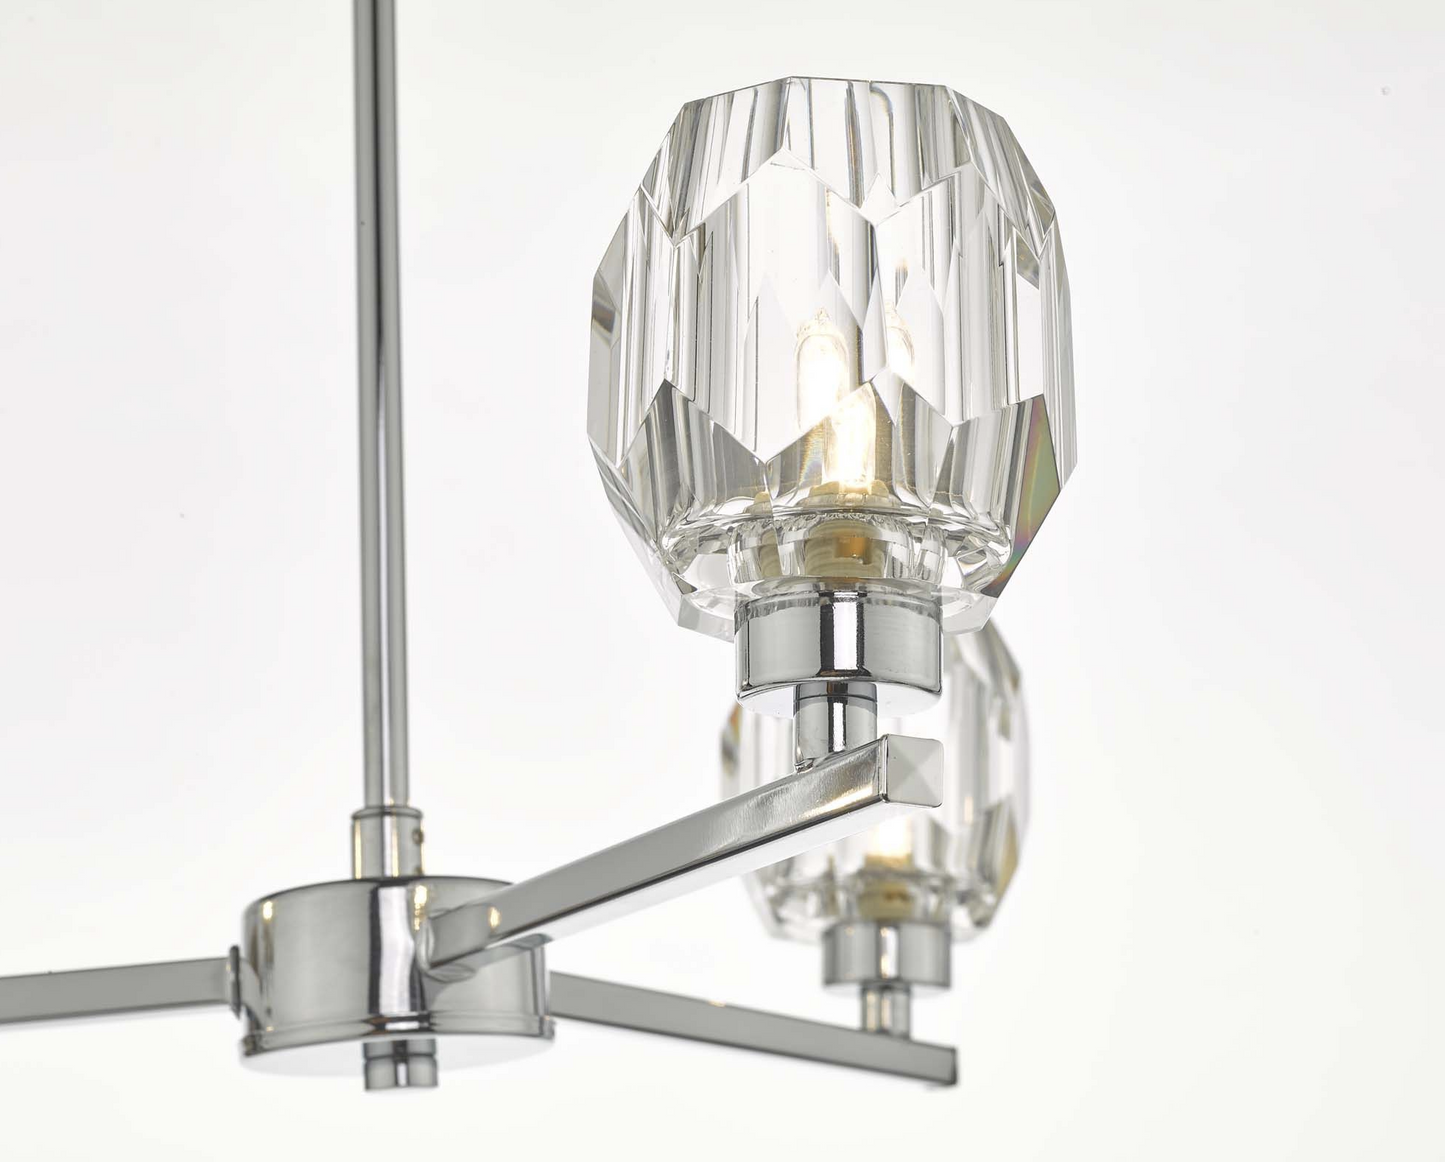 LEN 3 Arm Semi Flush Polished Chrome and Glass Ceiling Light - ID 10915 DISCONTINUED